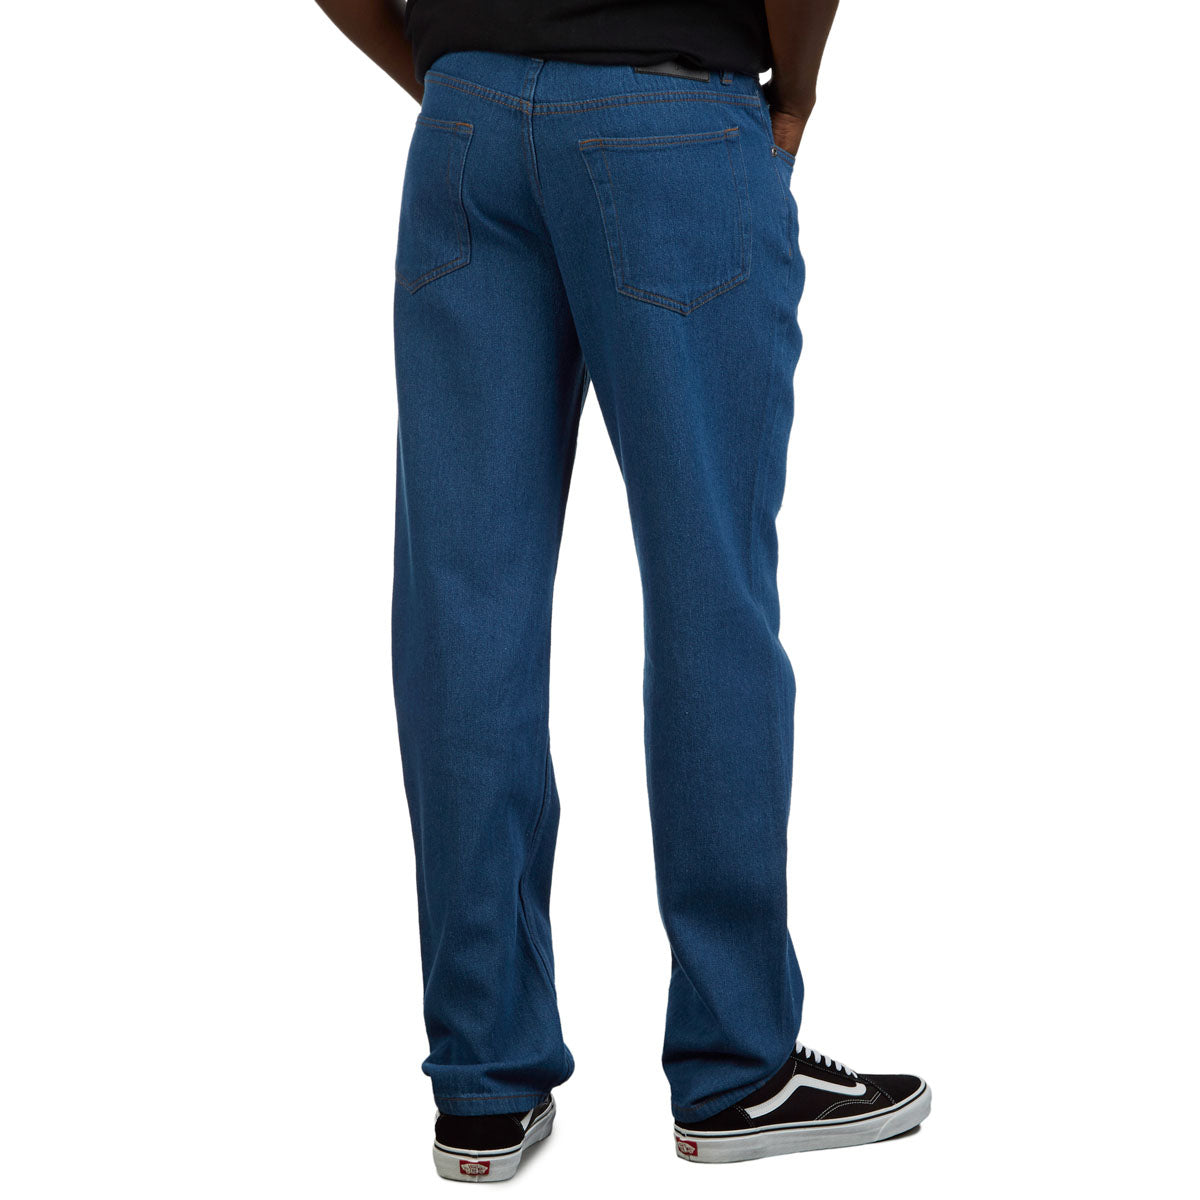 CCS Standard Plus Relaxed Denim Jeans - Rinse